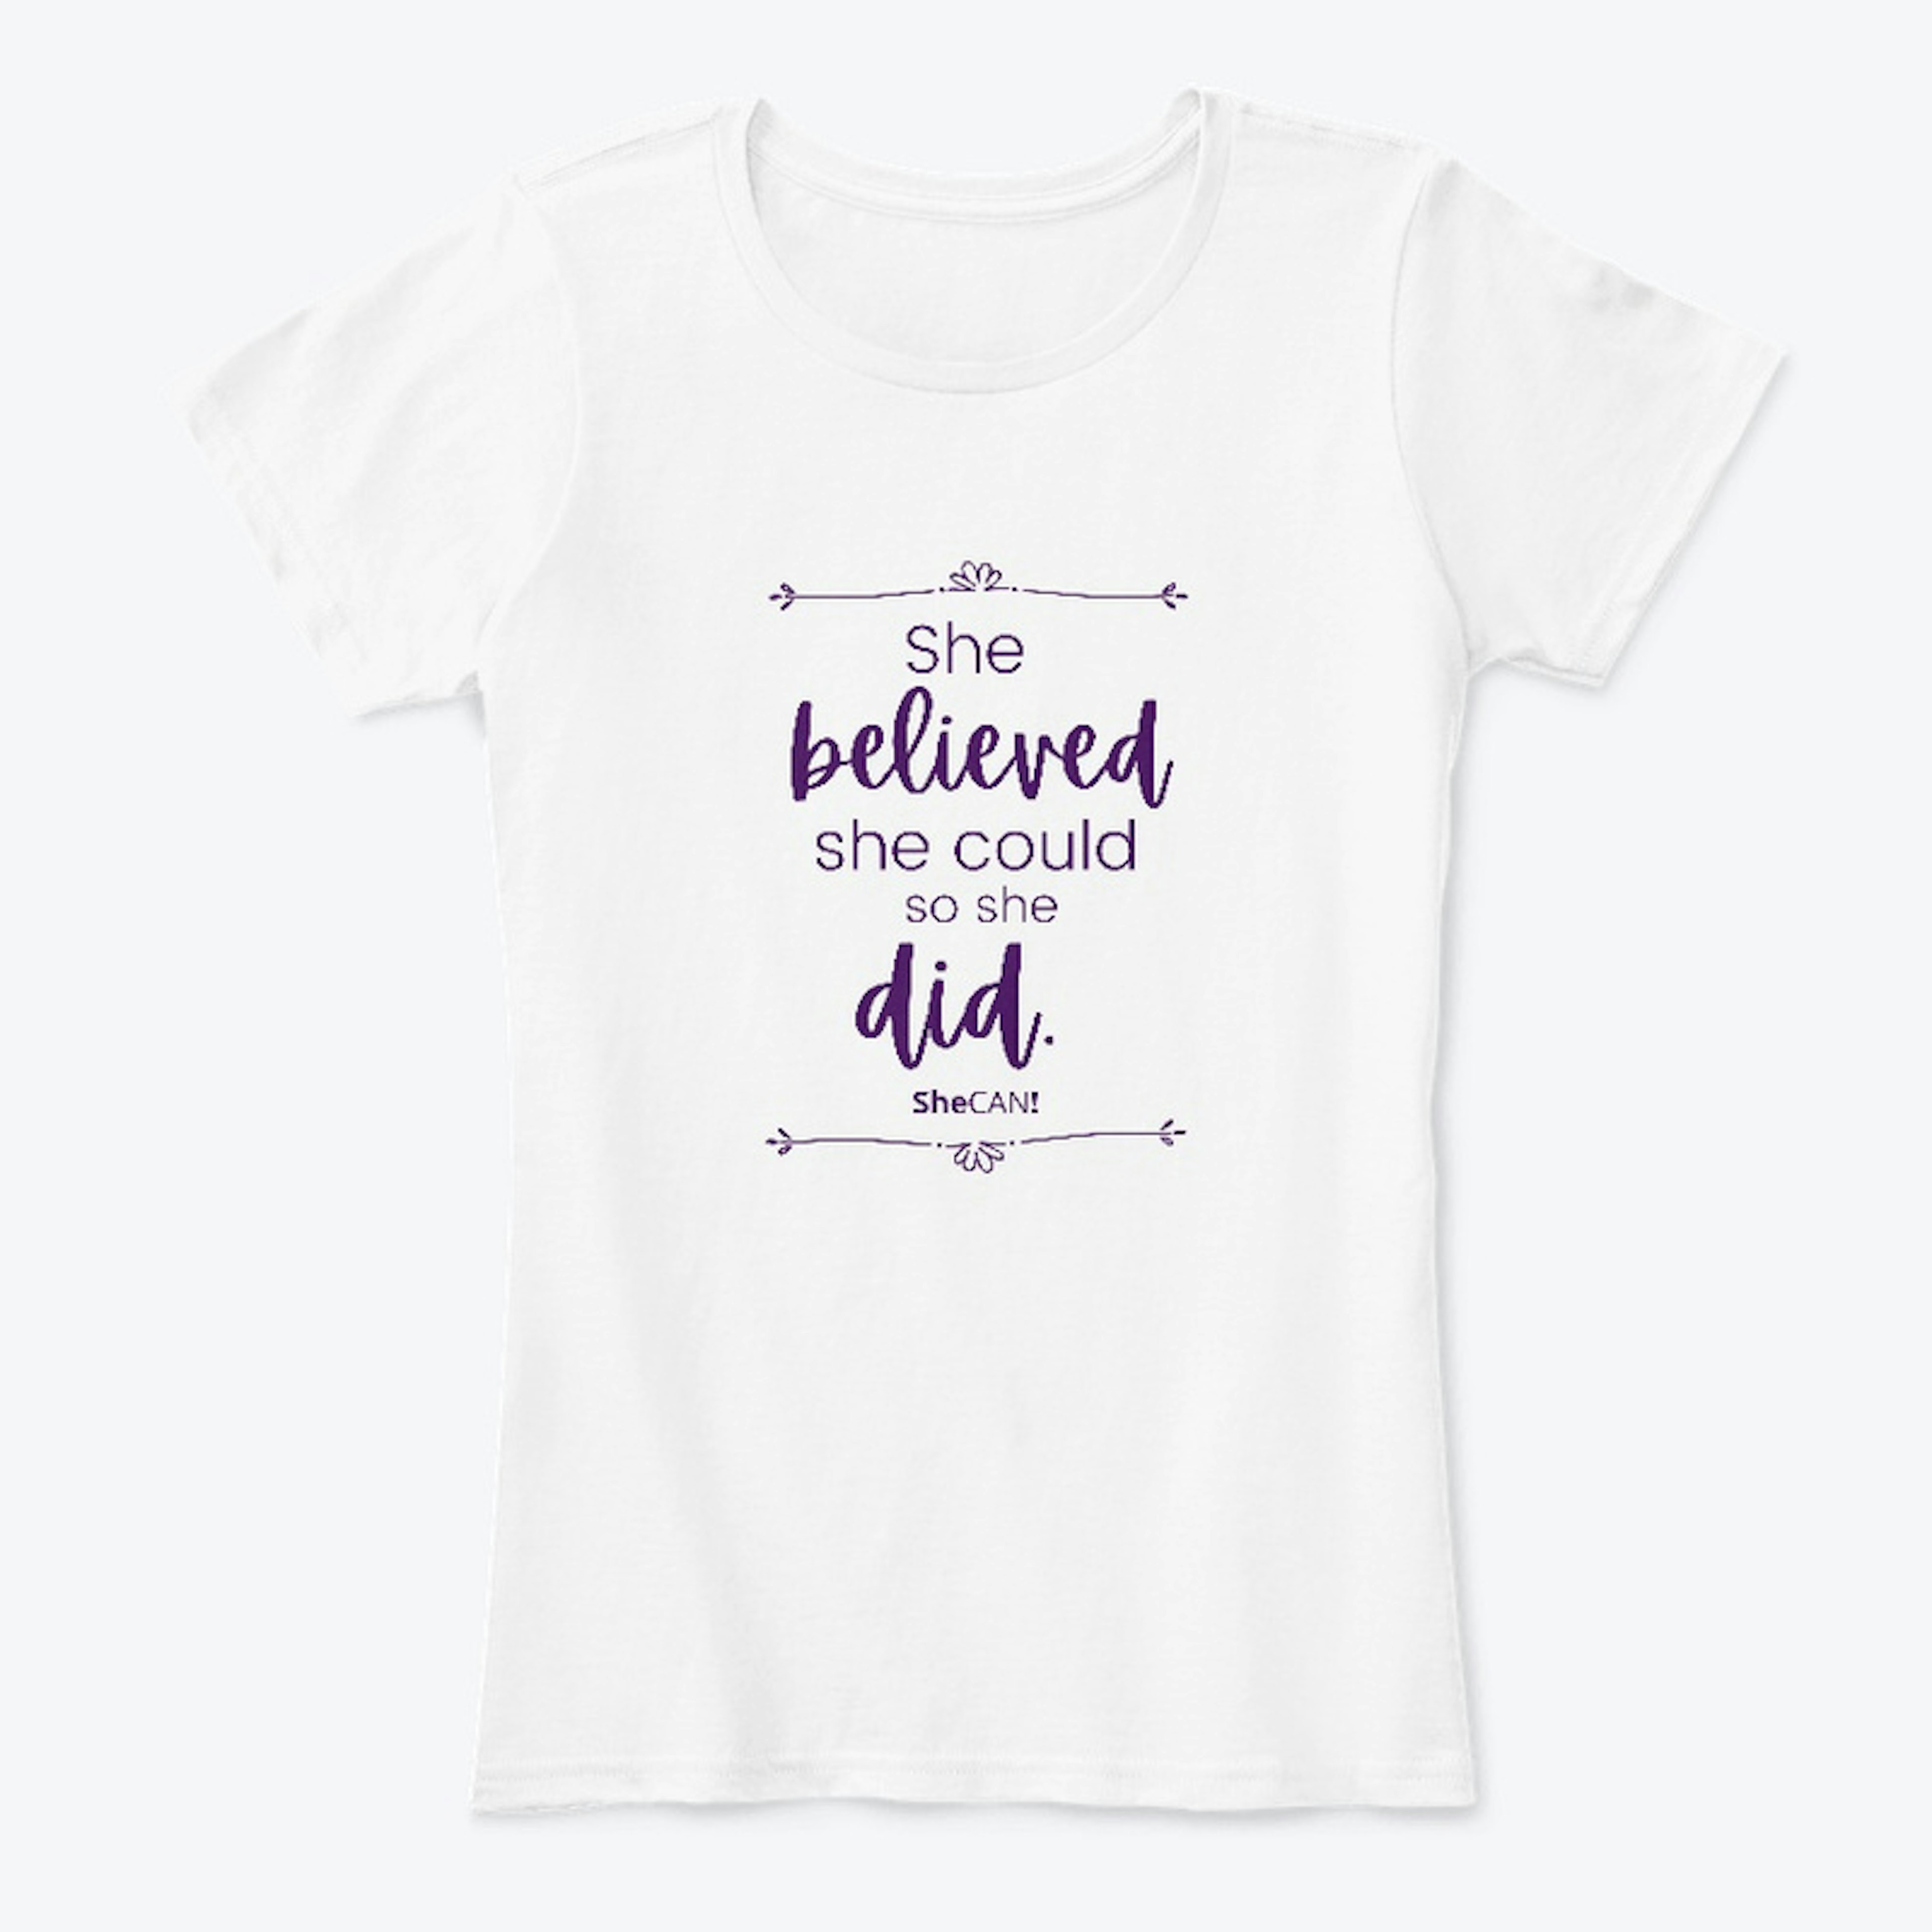 She believed she could so she did.